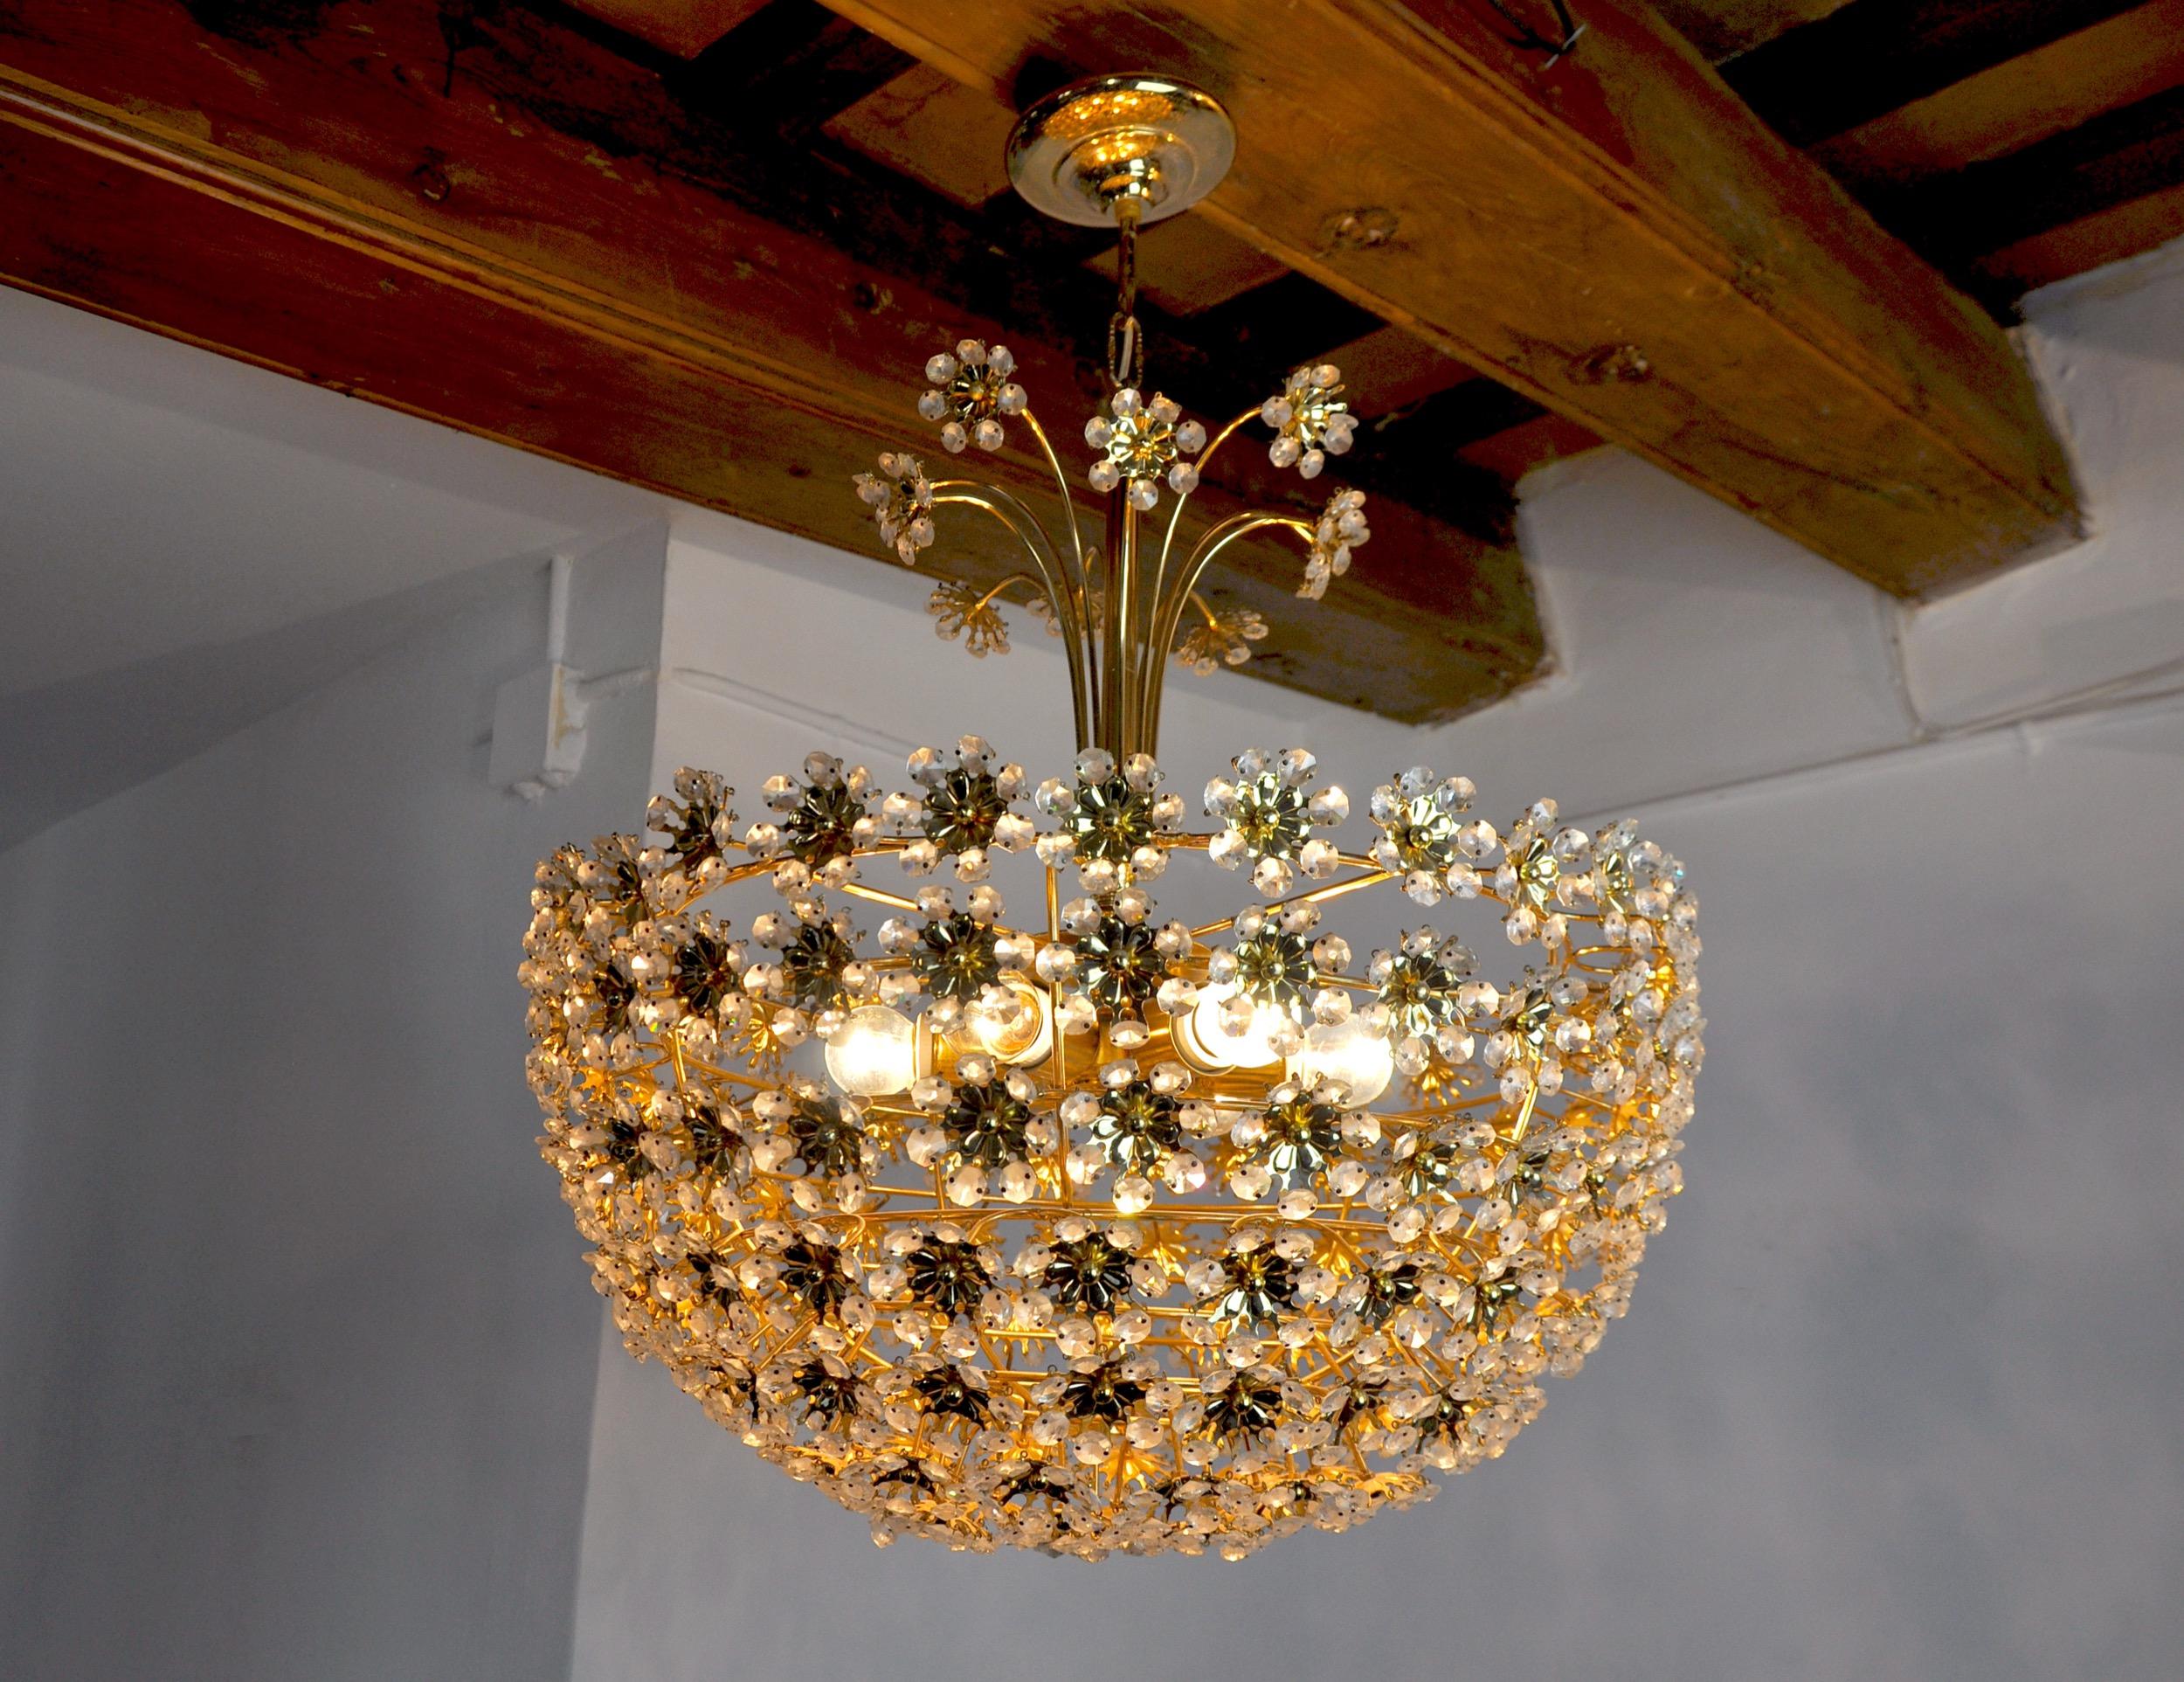 Superb and rare xxl floral chandelier designed and produced by bakalowits & söhne in austria in the 1970s.
Golden structure composed of crystals cut in perfect condition.
Rare design object that will illuminate your interior perfectly.
Verified